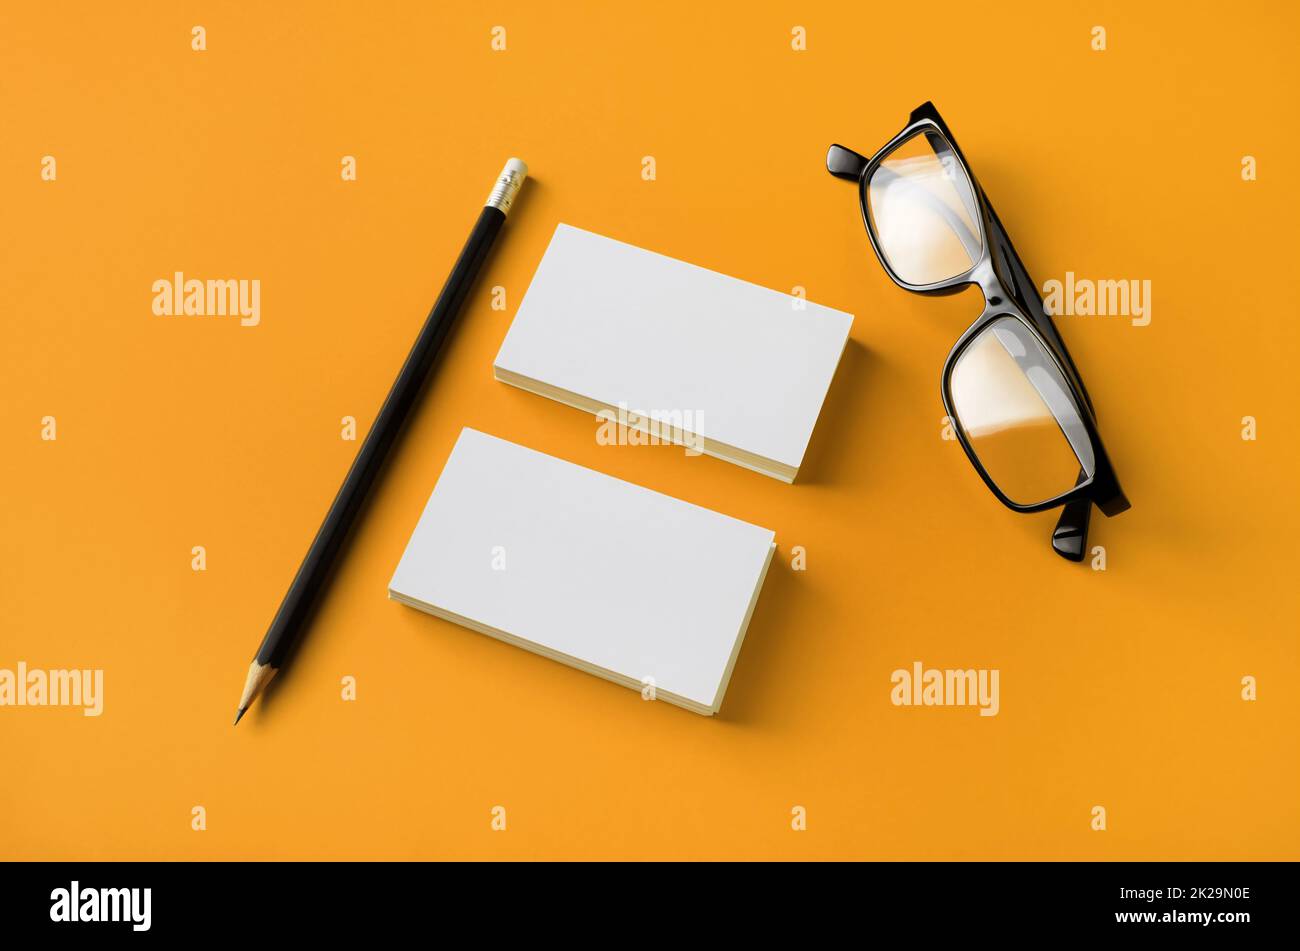 Business cards, glasses, pencil Stock Photo